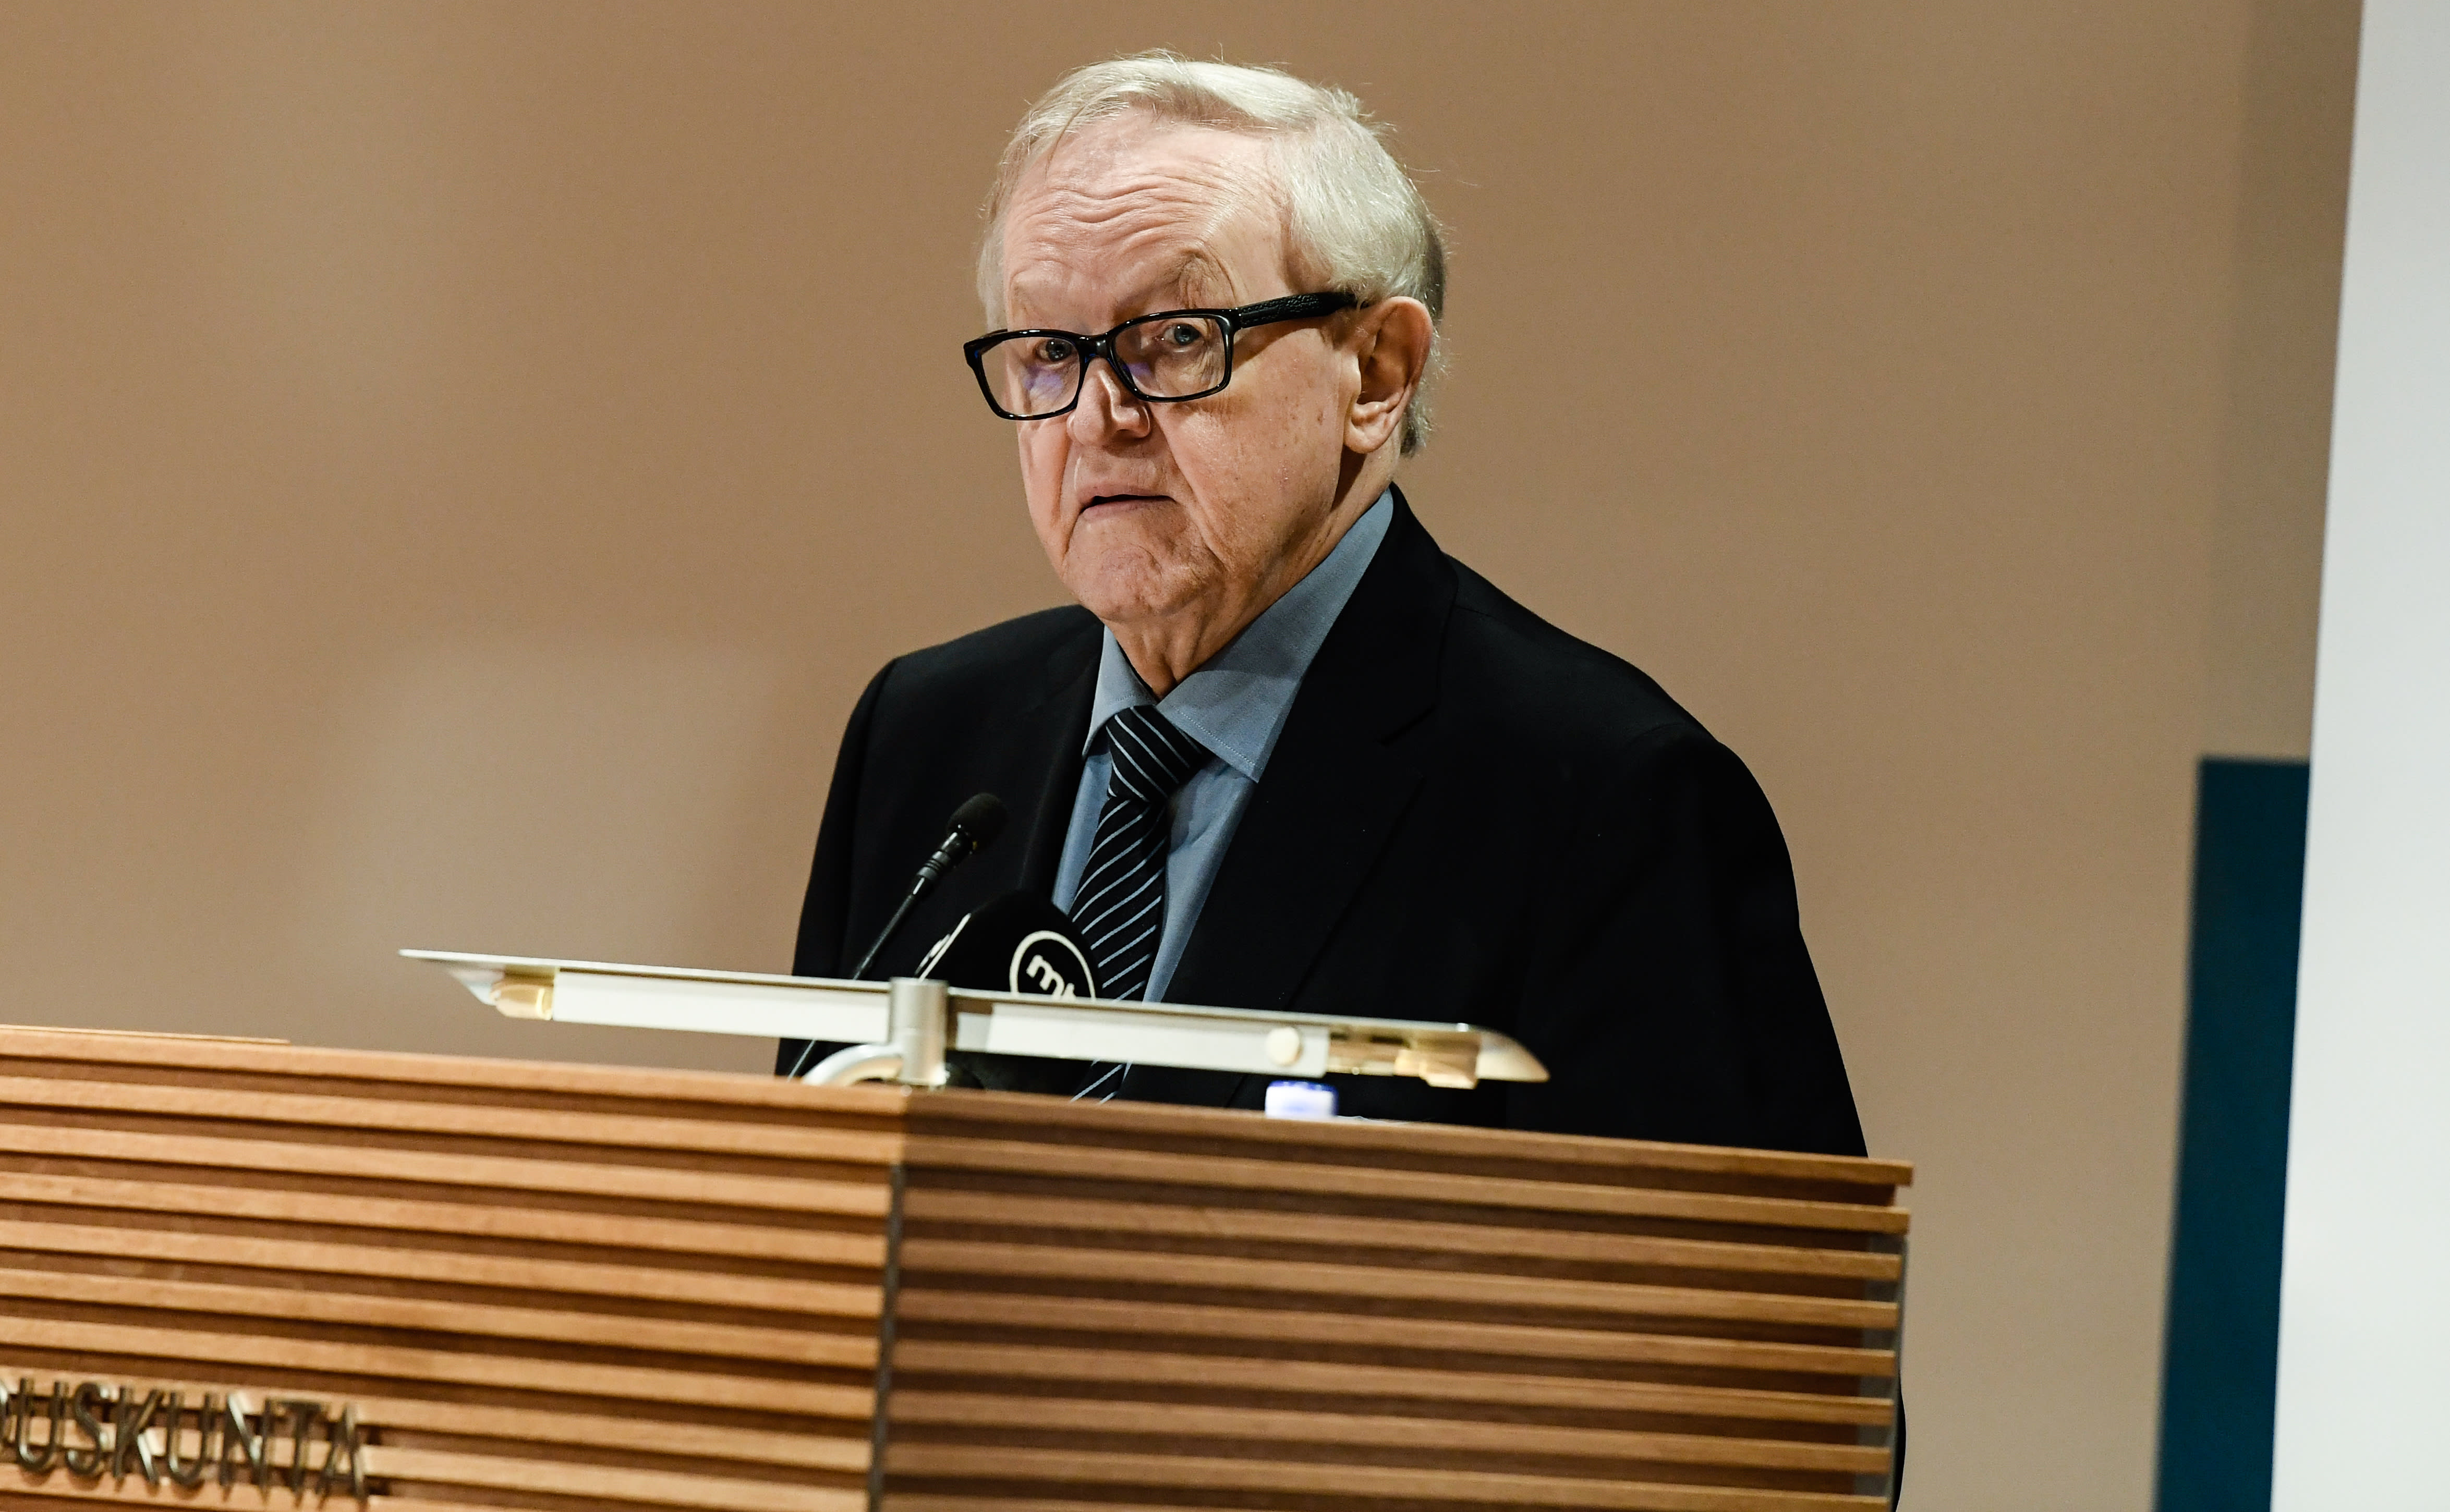 Former President Ahtisaari will retire from public life after being diagnosed with Alzheimer’s